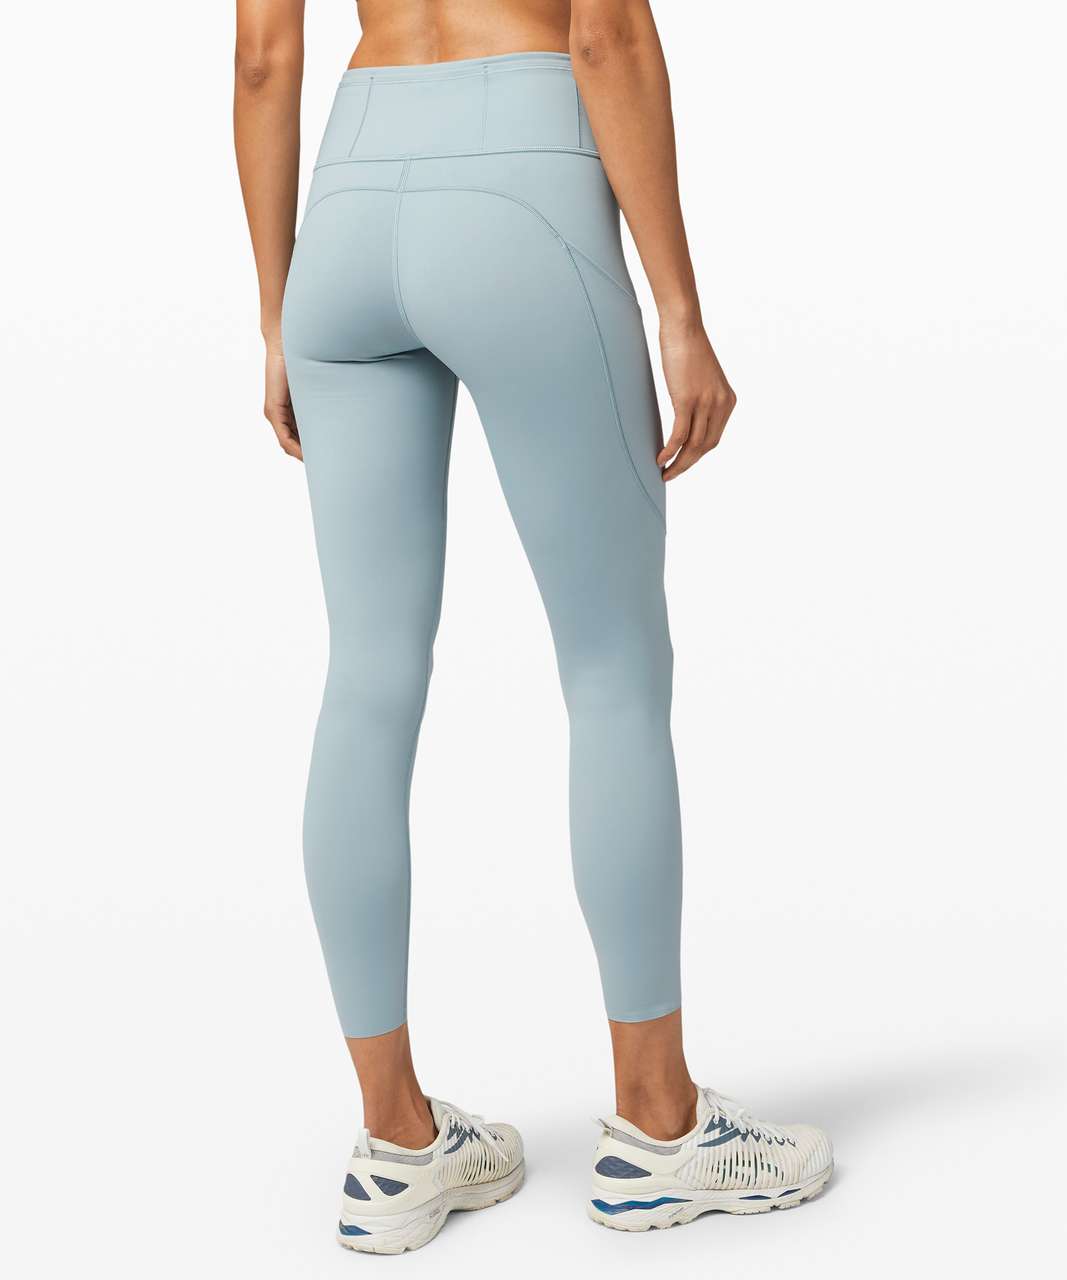 Lululemon Fast and Free Tight II 25" *Non-Reflective Nulux - Blue Cast